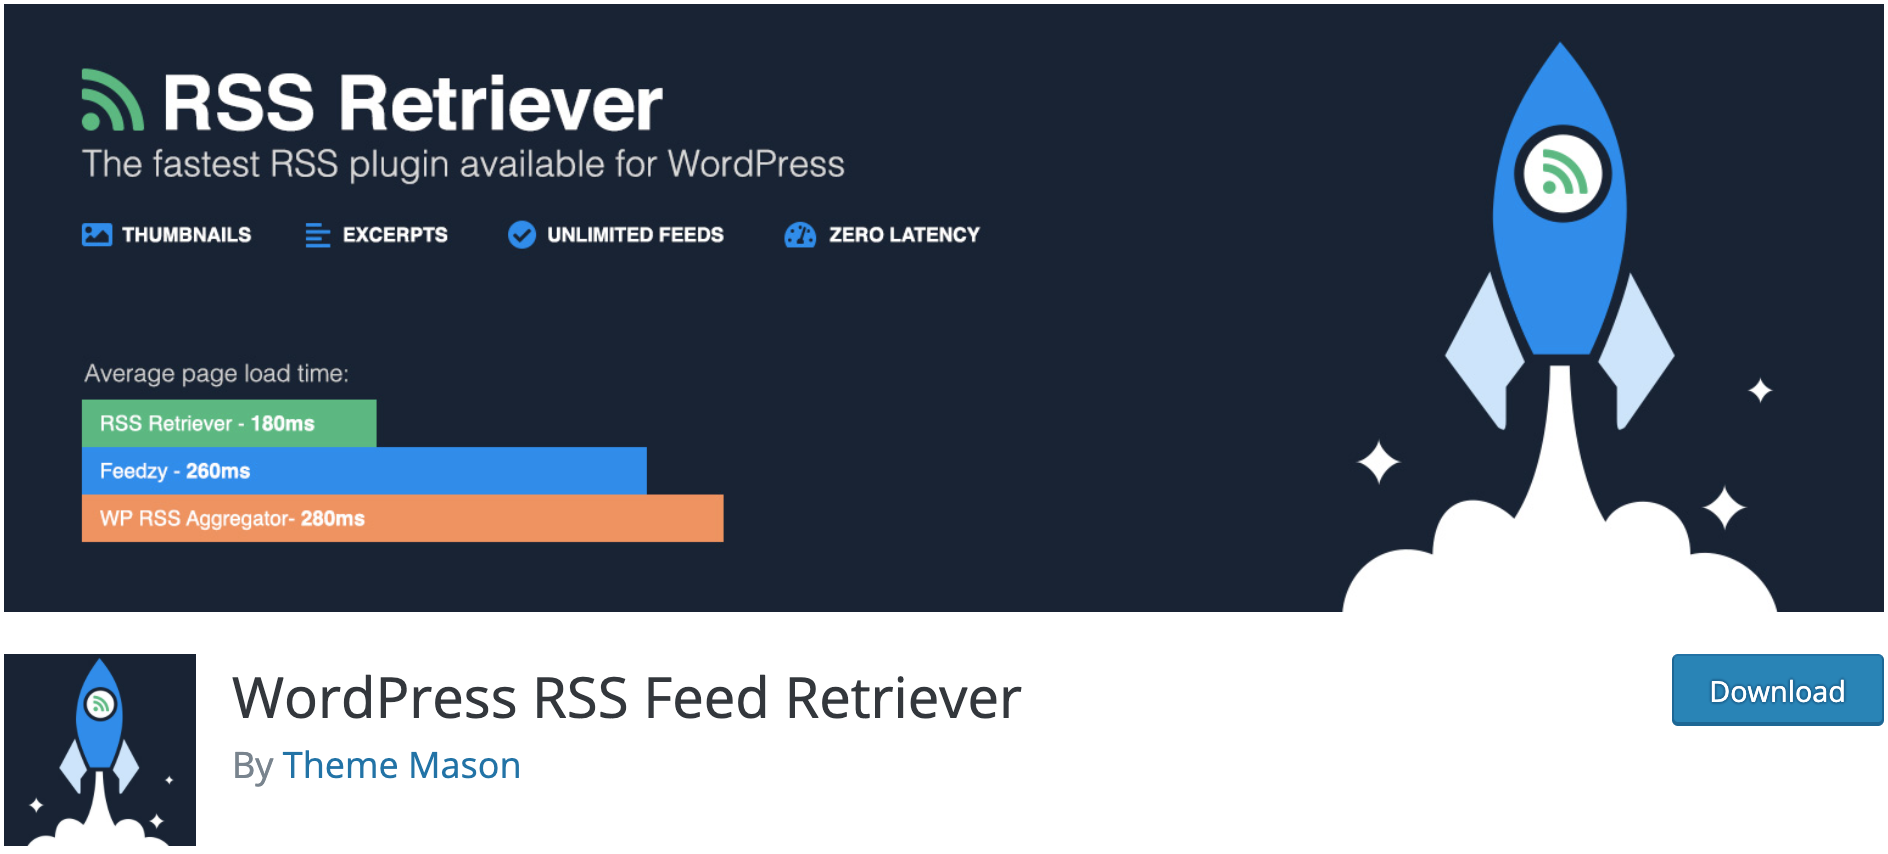 WordPress RSS Feed Retriever page to download the plugin